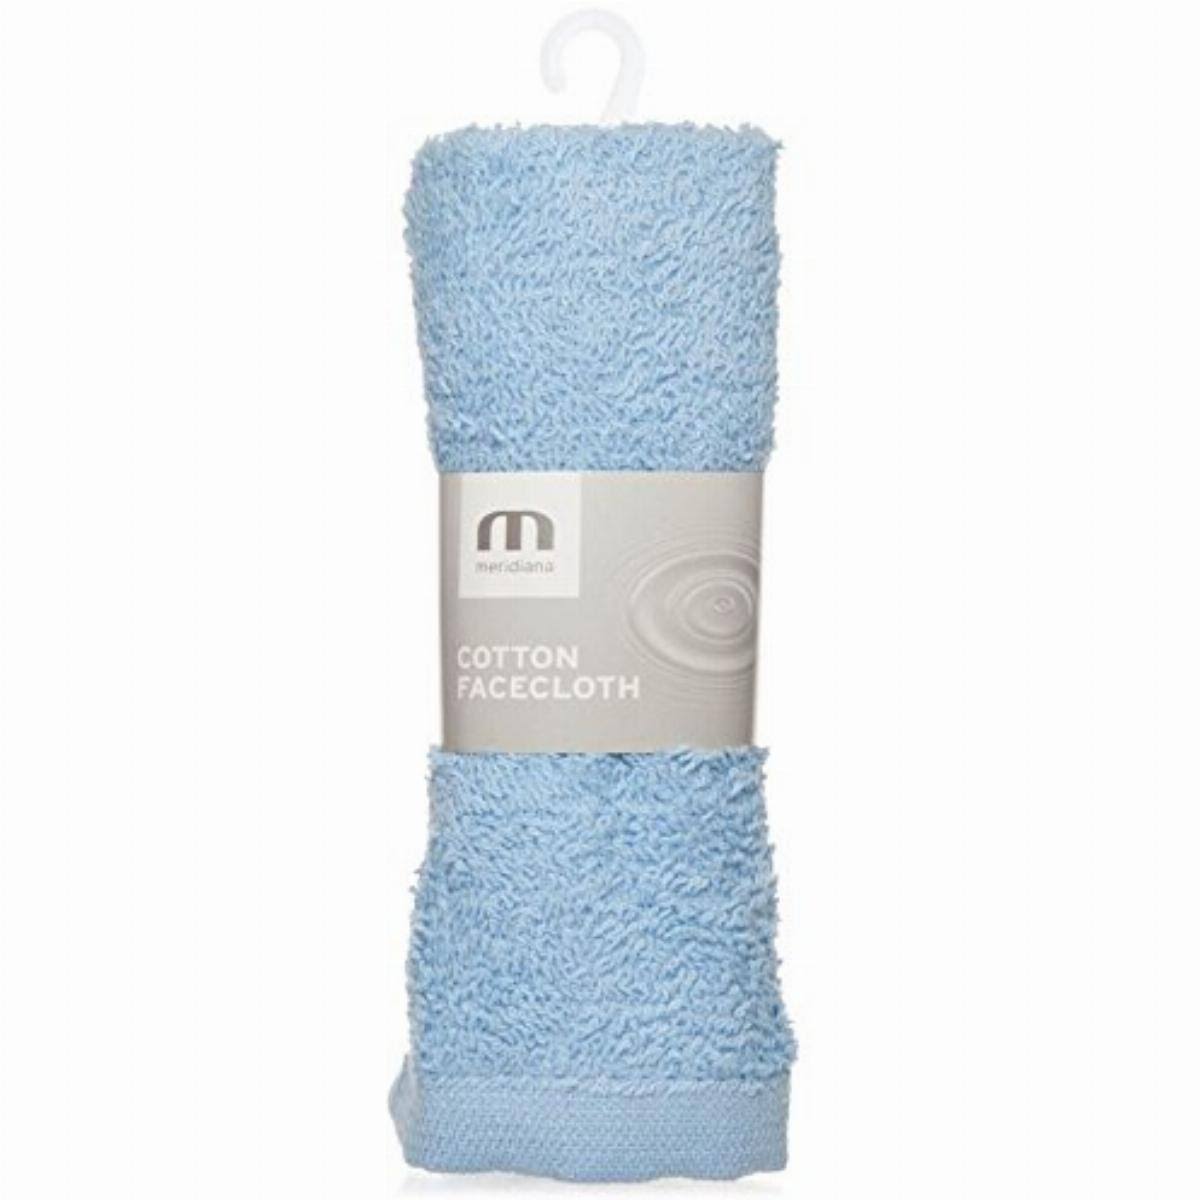 Meridiana Cotton Facecloth, Baby Blue.